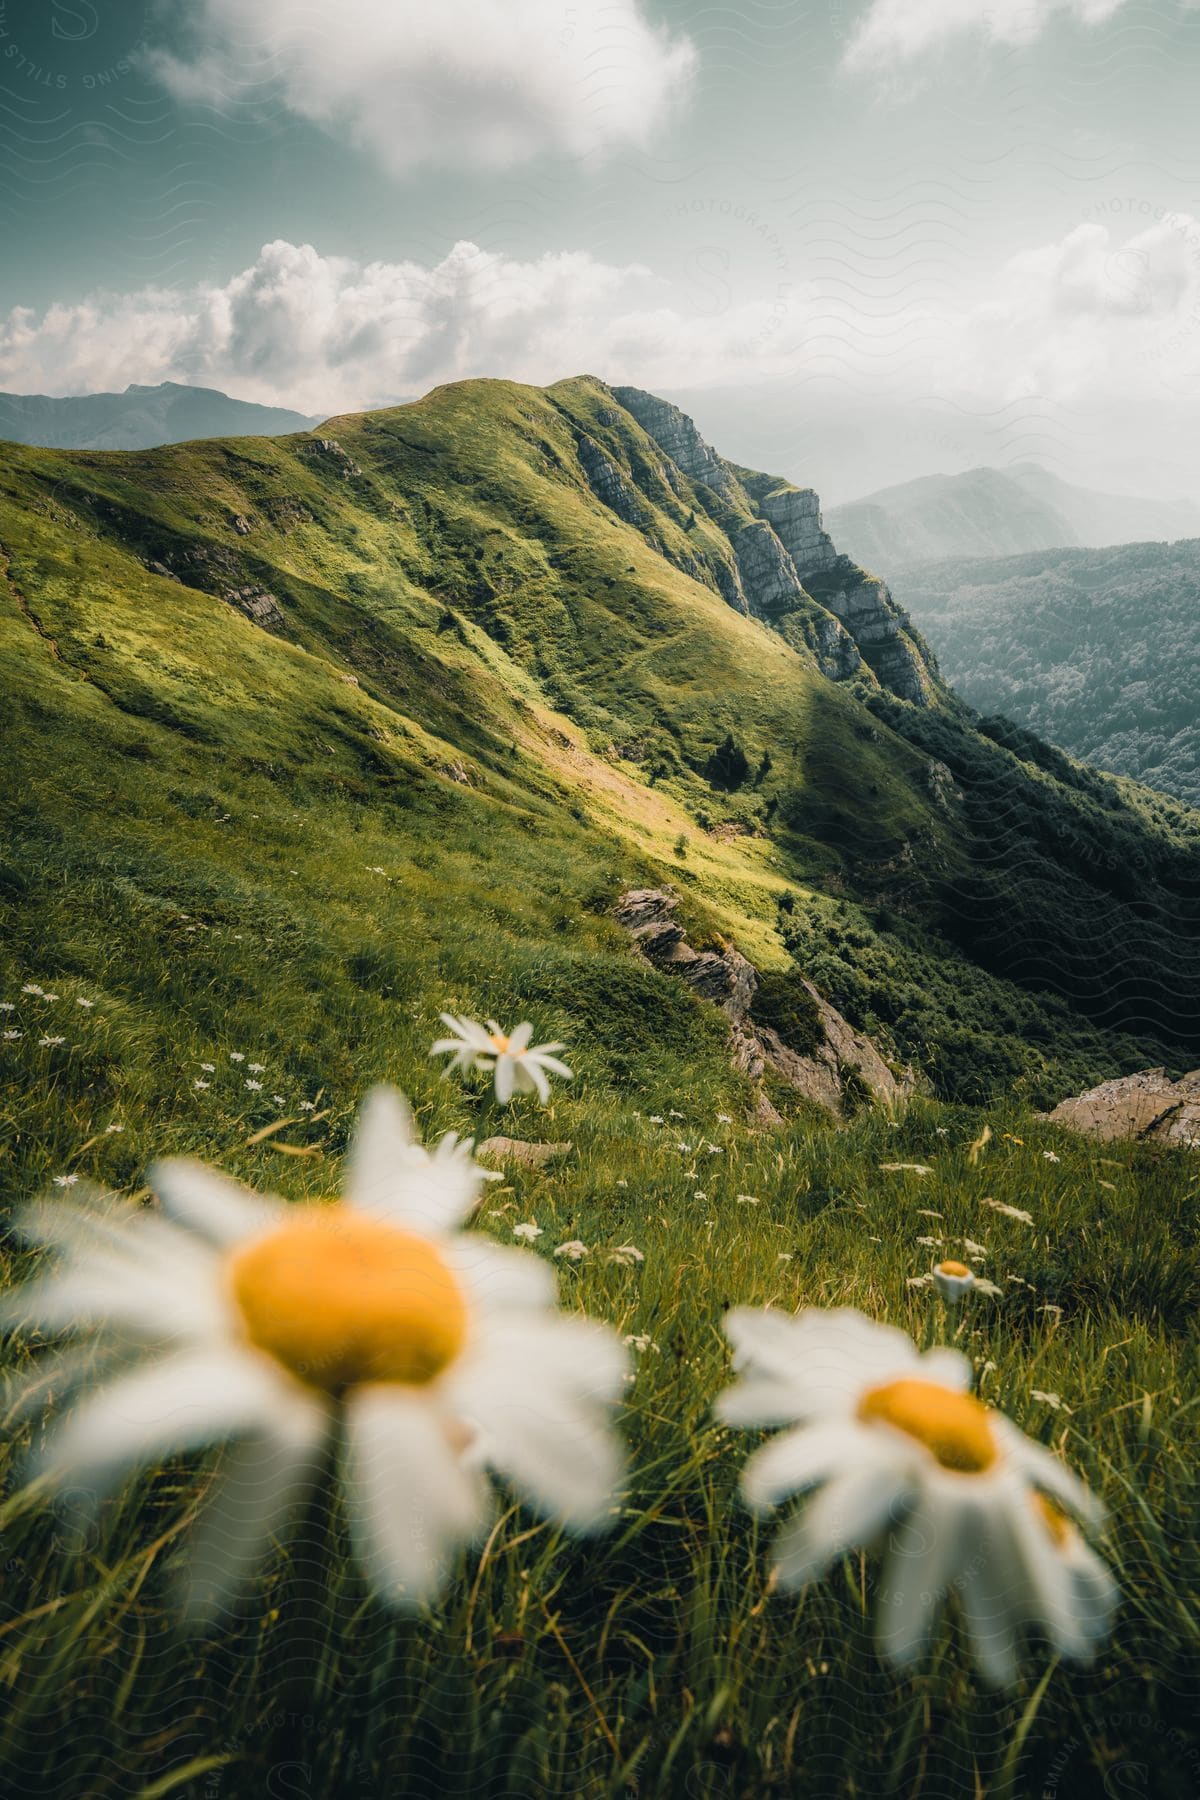 A lush green mountain valley with tiny daisies blooming.